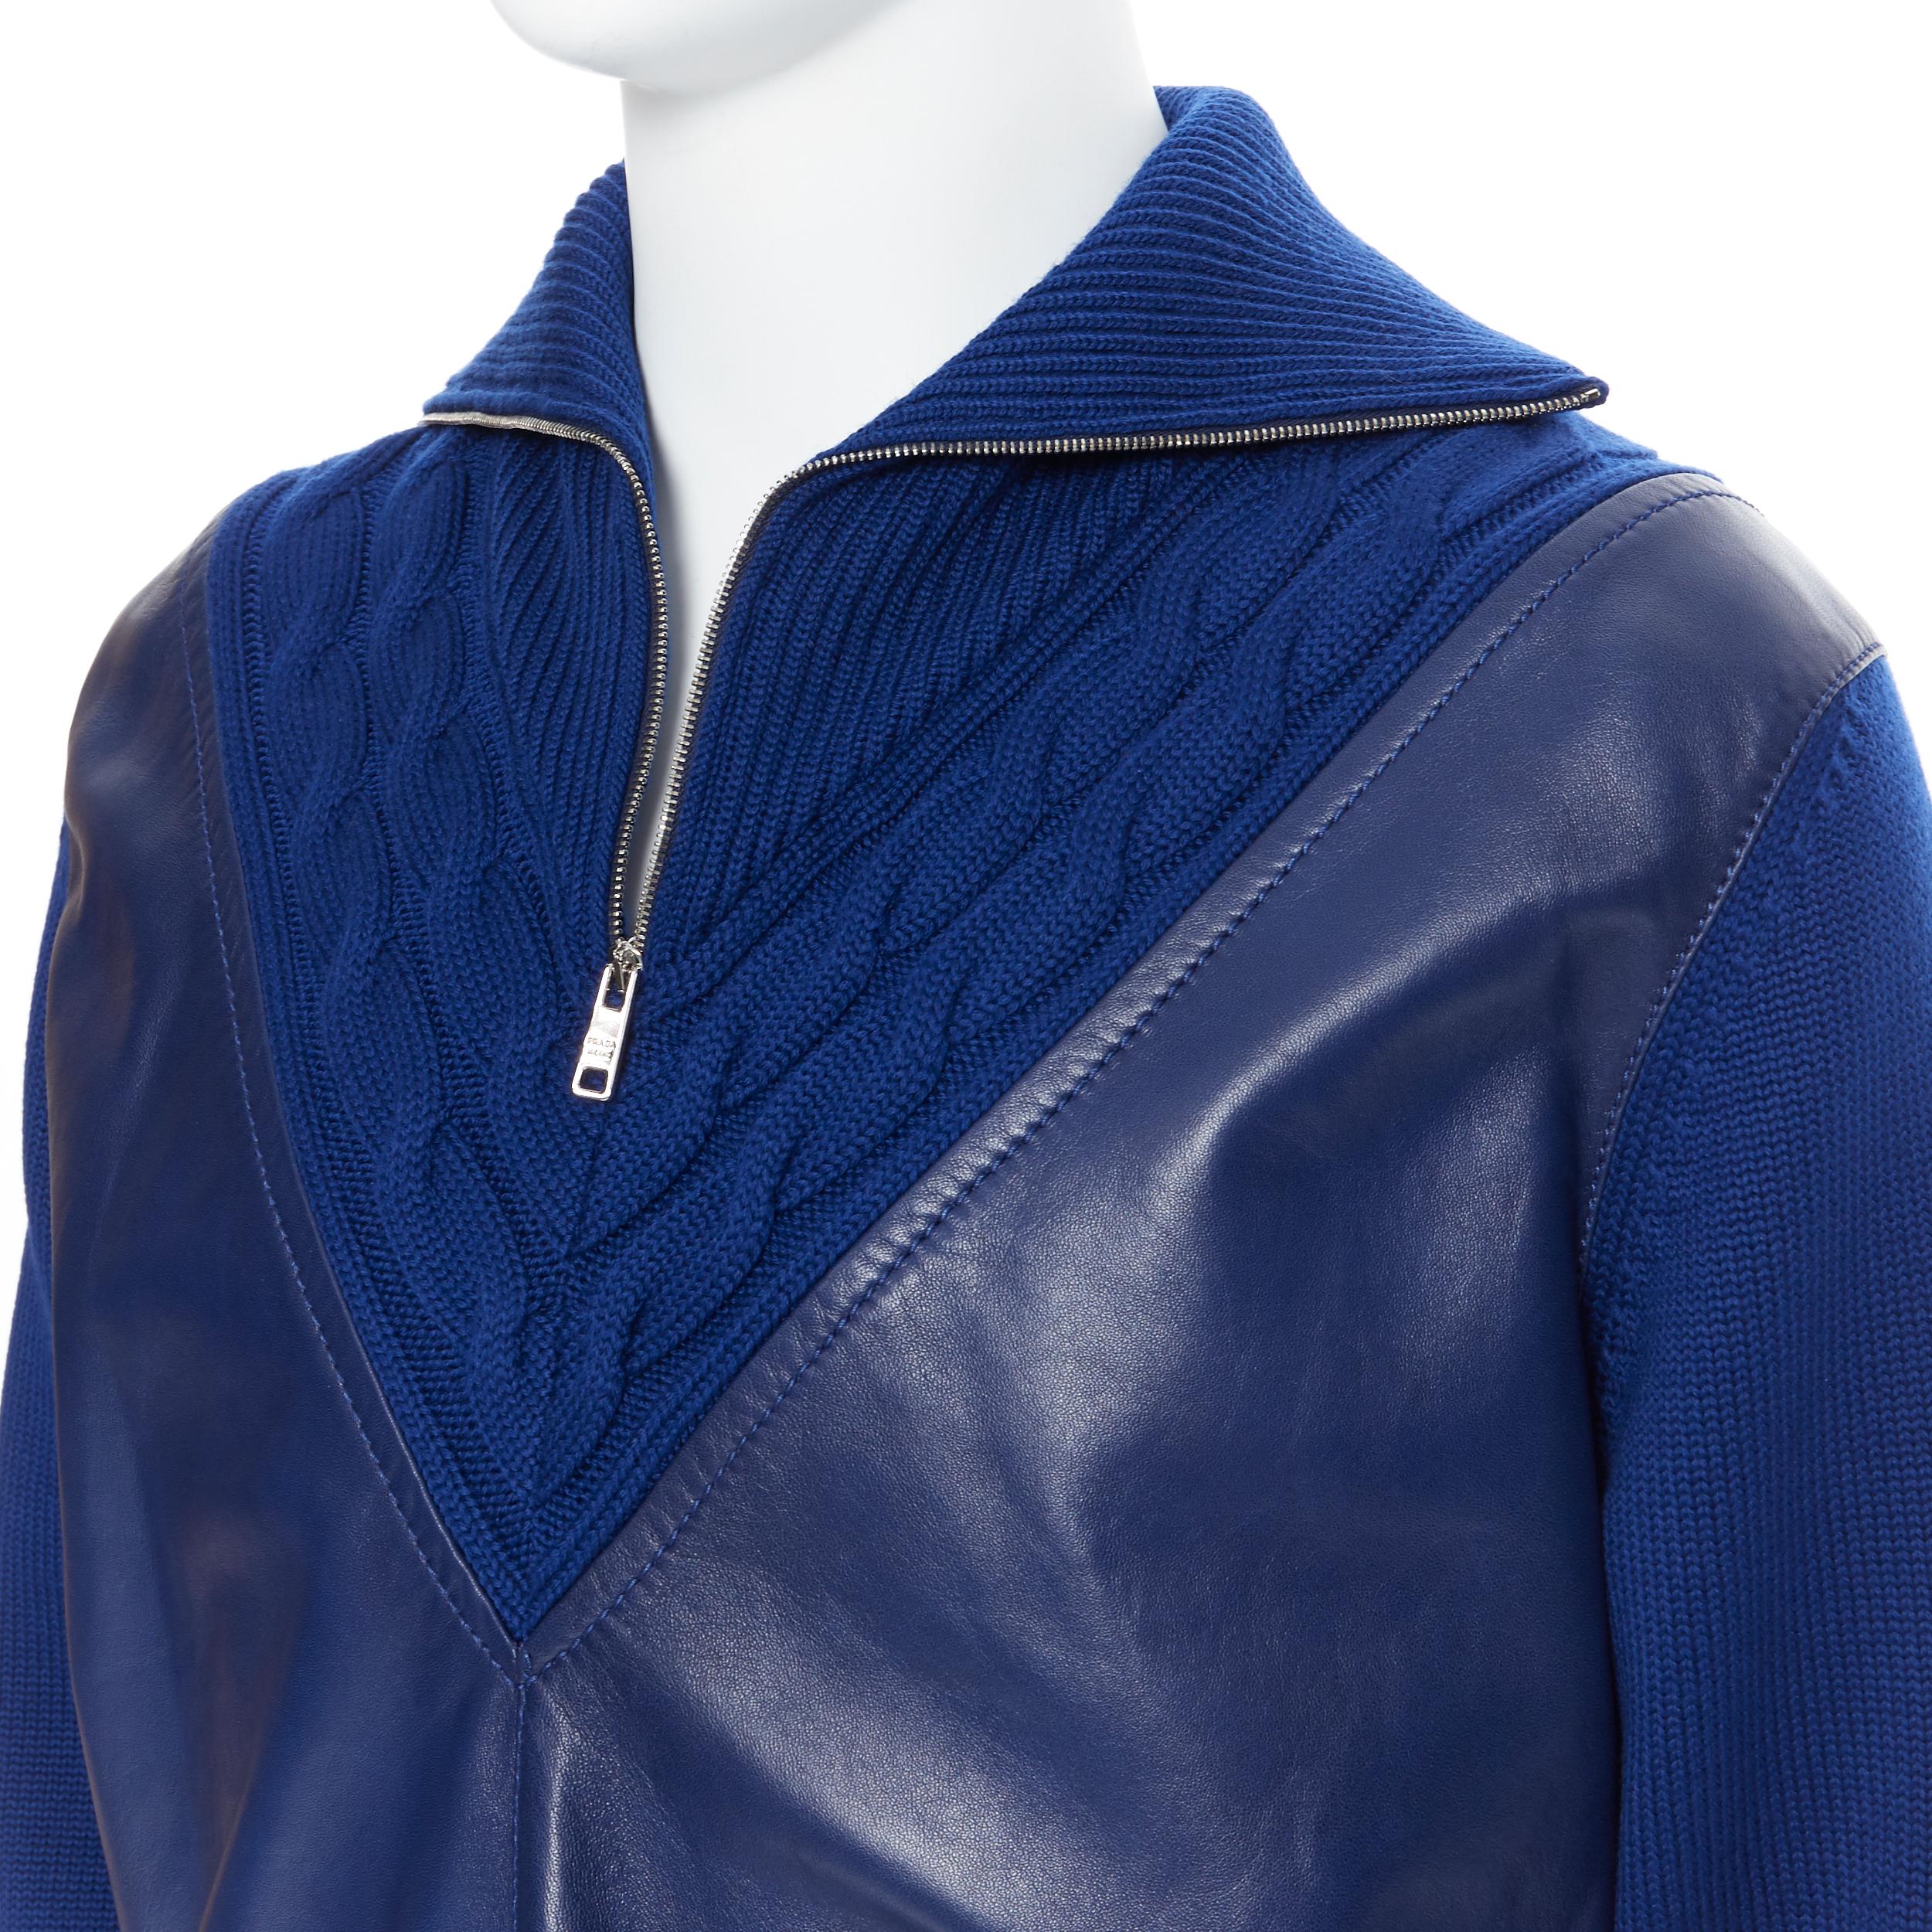 new PRADA 2019 blue leather panel front half zip cable knit varsity sweater IT48
Brand: Prada
Designer: Miuccia Prada
Collection: Spring Summer 2019
Model Name / Style: Sweater
Material: Leather, wool
Color: Blue
Pattern: Solid
Closure: Zip
Extra